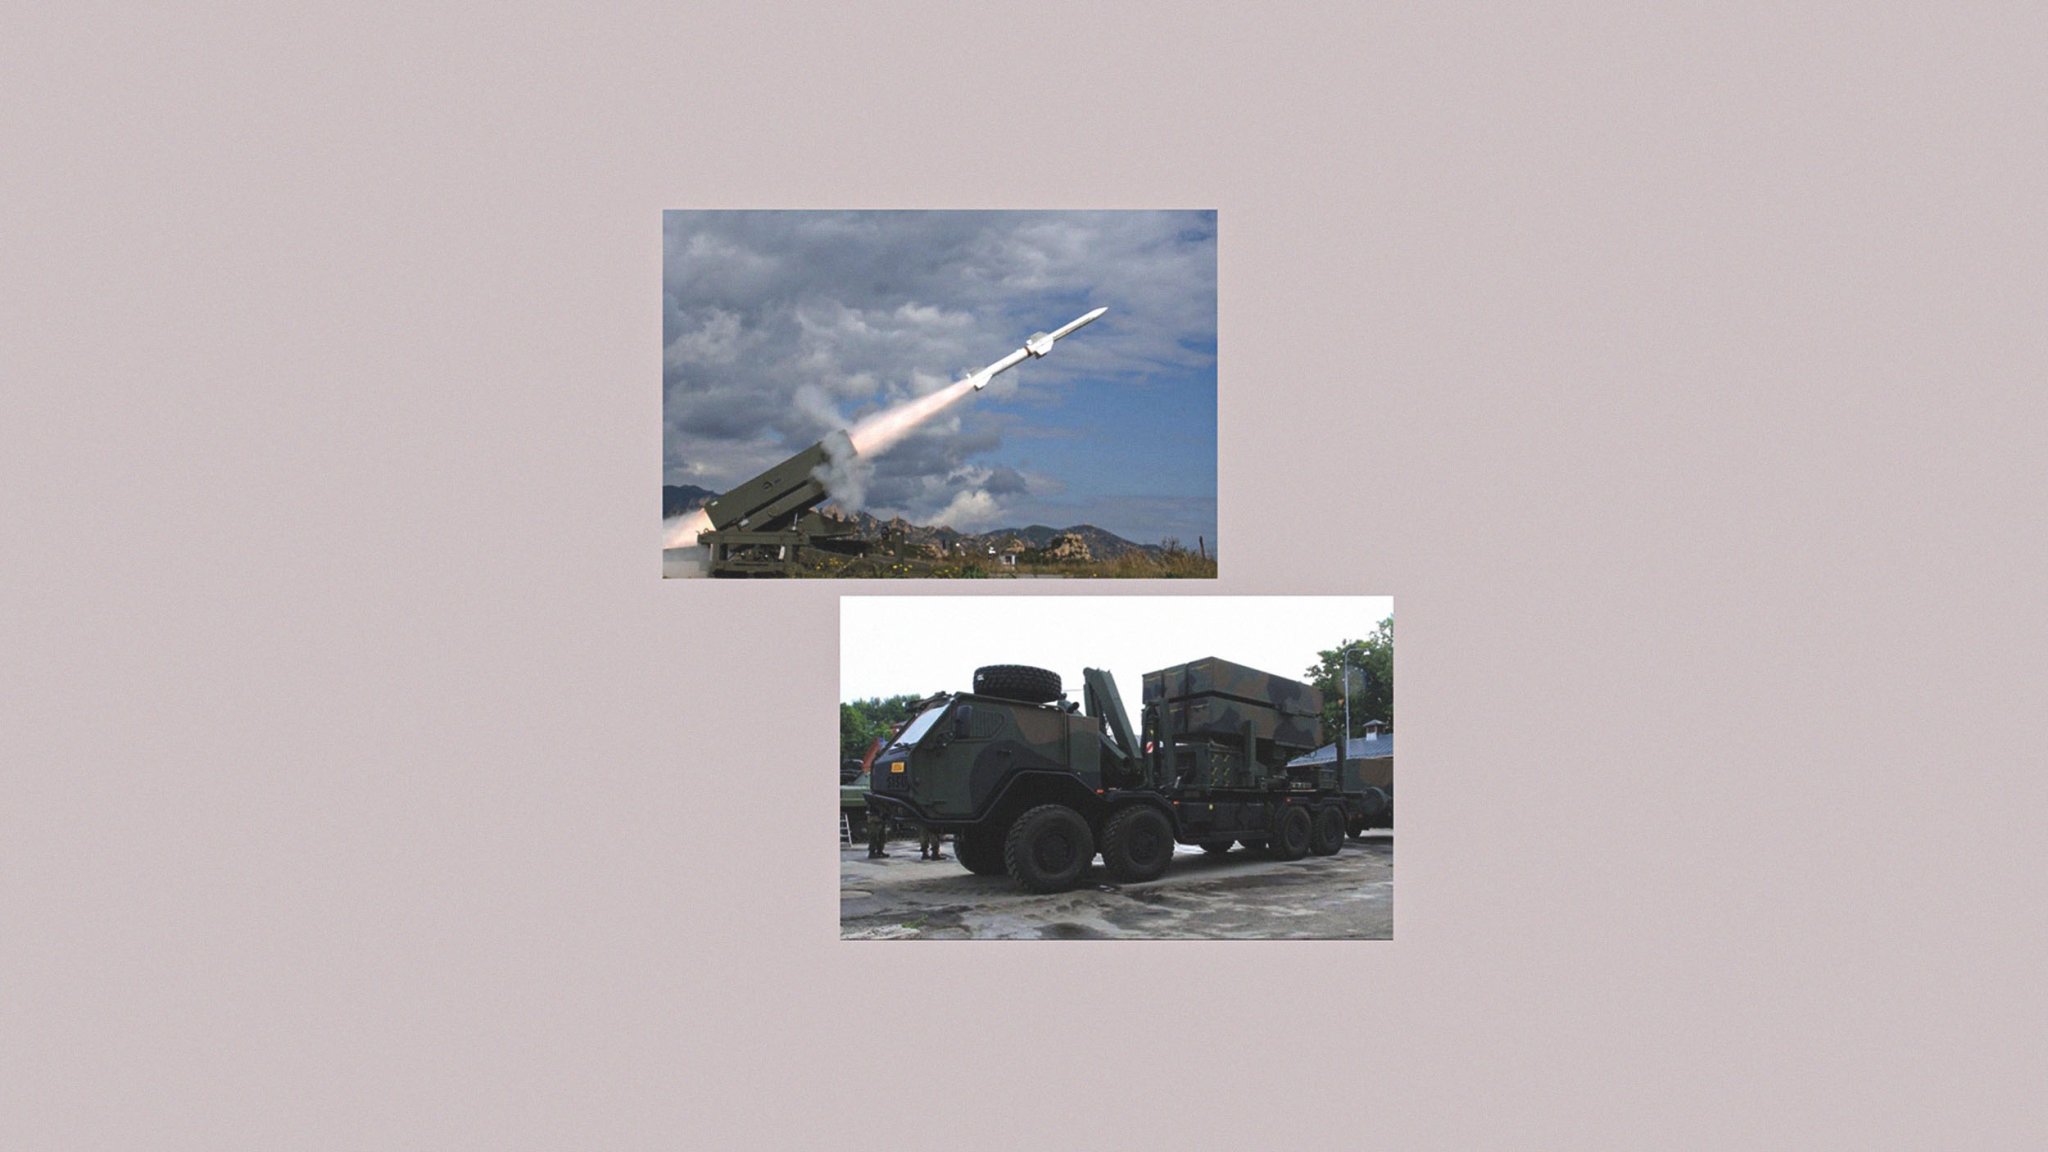 NASAMS: The latest Western weapon sent to Ukraine aims to knock Russian missiles out of the sky